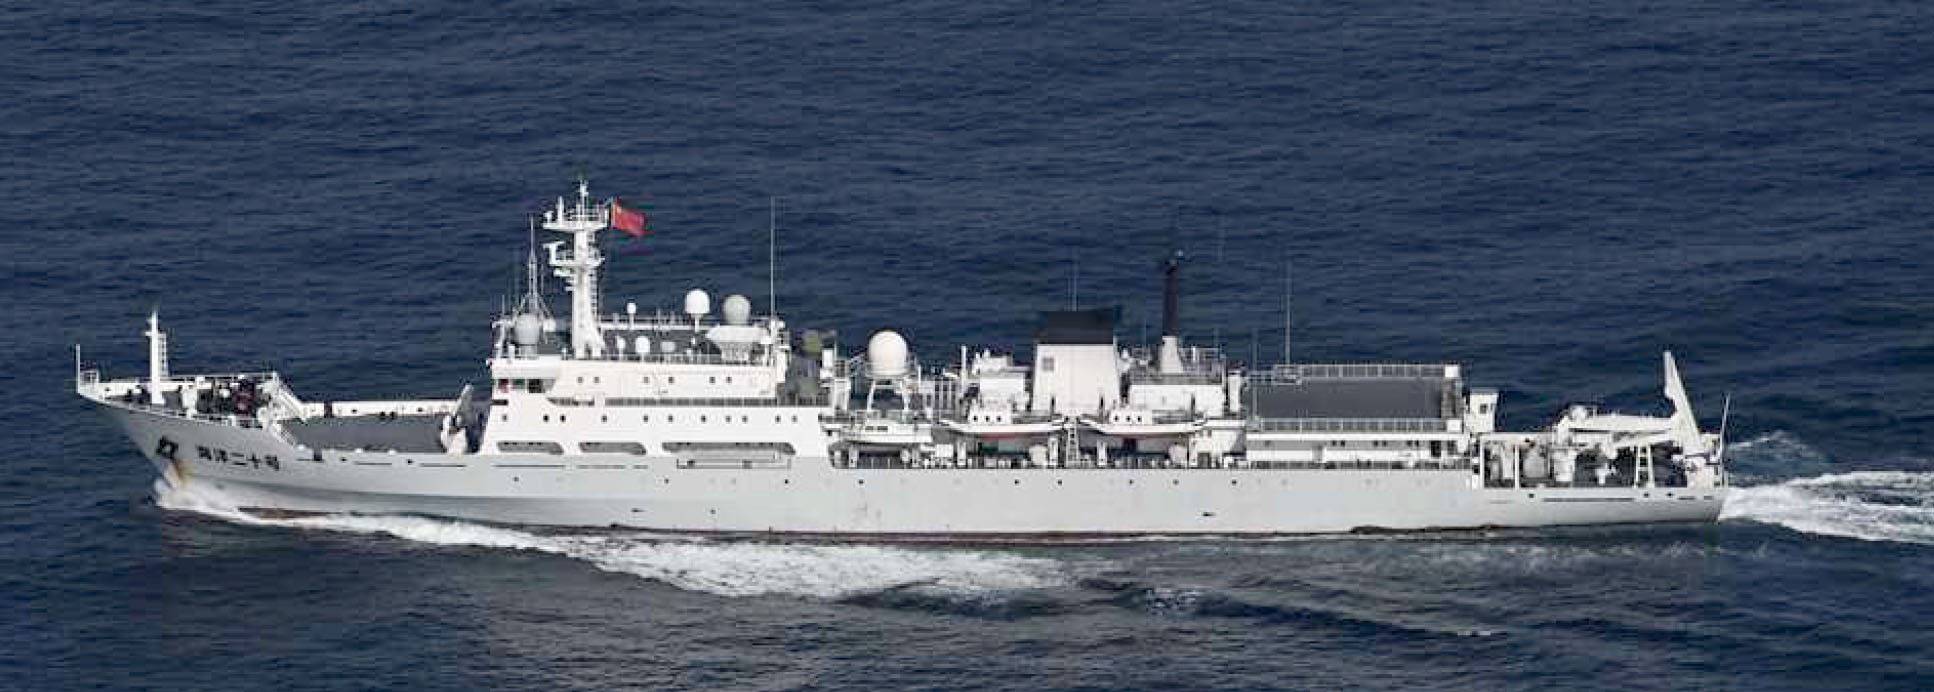 Undated photo shows a Chinese Navy survey vessel sailing in Japanese territorial waters near Kagoshima Prefecture's Yakushima Island. | DEFENSE MINISTRY / VIA KYODO